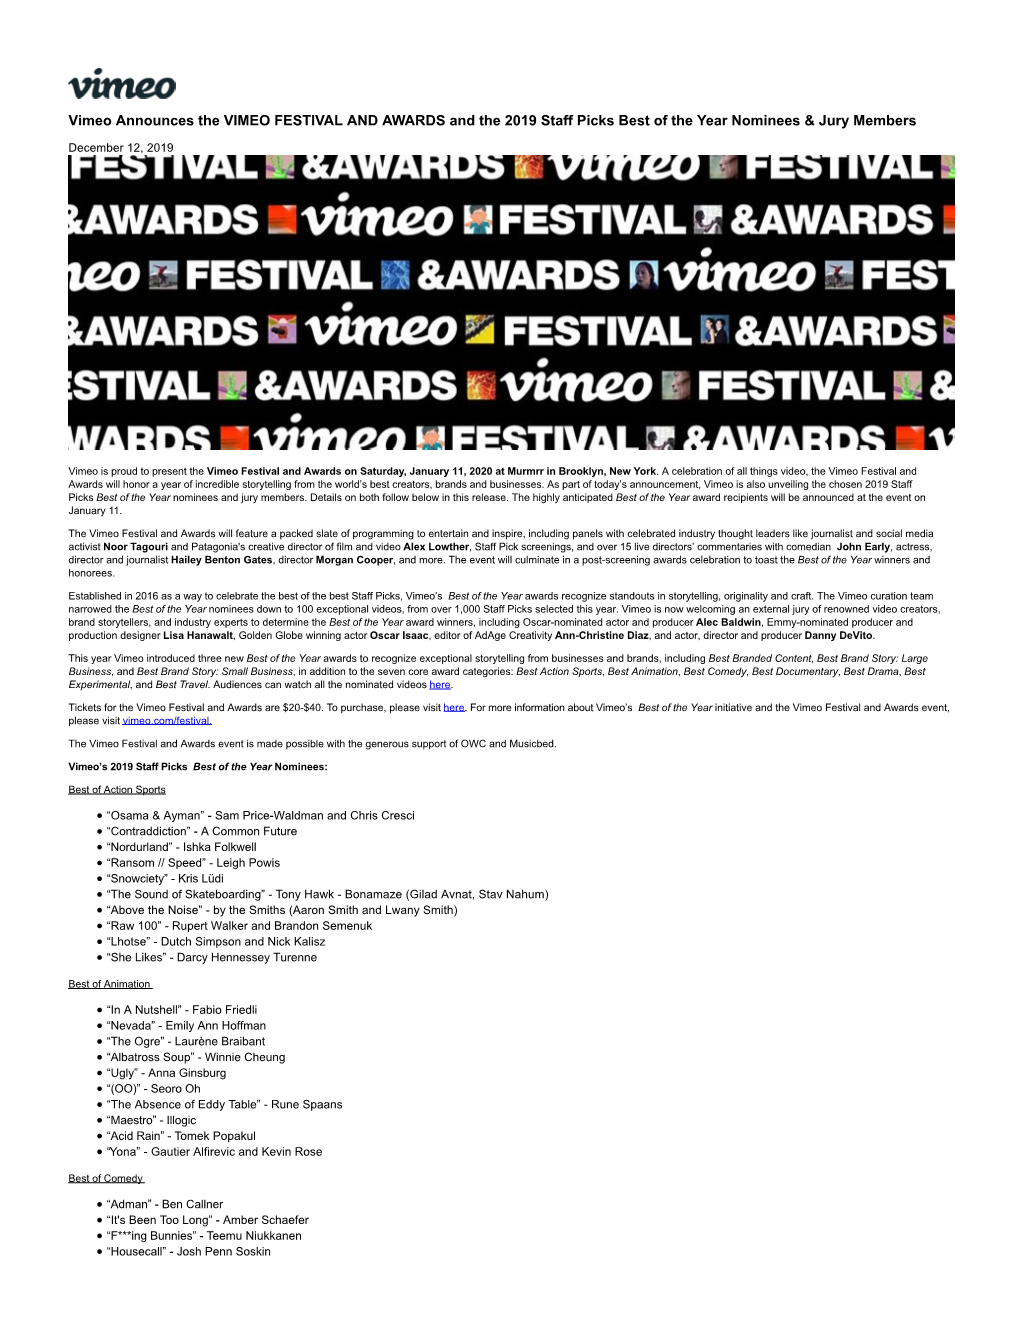 Vimeo Announces the VIMEO FESTIVAL and AWARDS and the 2019 Staff Picks Best of the Year Nominees & Jury Members